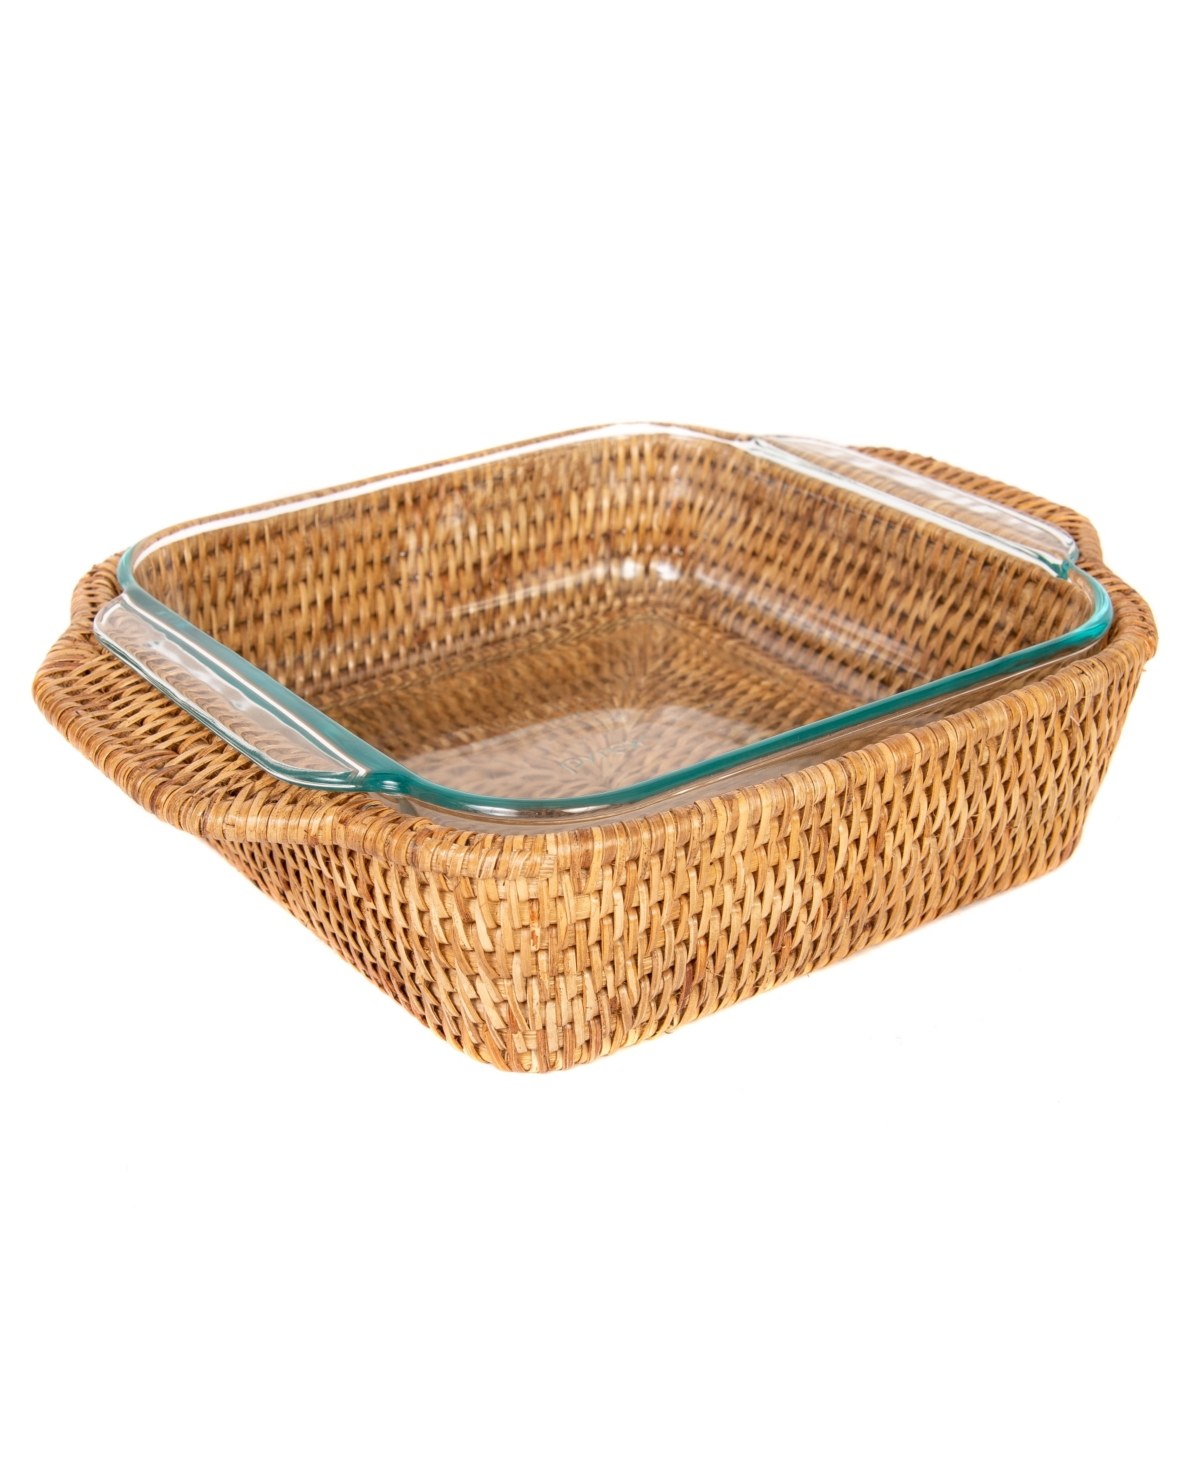 Shop Artifacts Trading Company Artifacts Rattan Square Baker Basket With Pyrex In Honey Brown